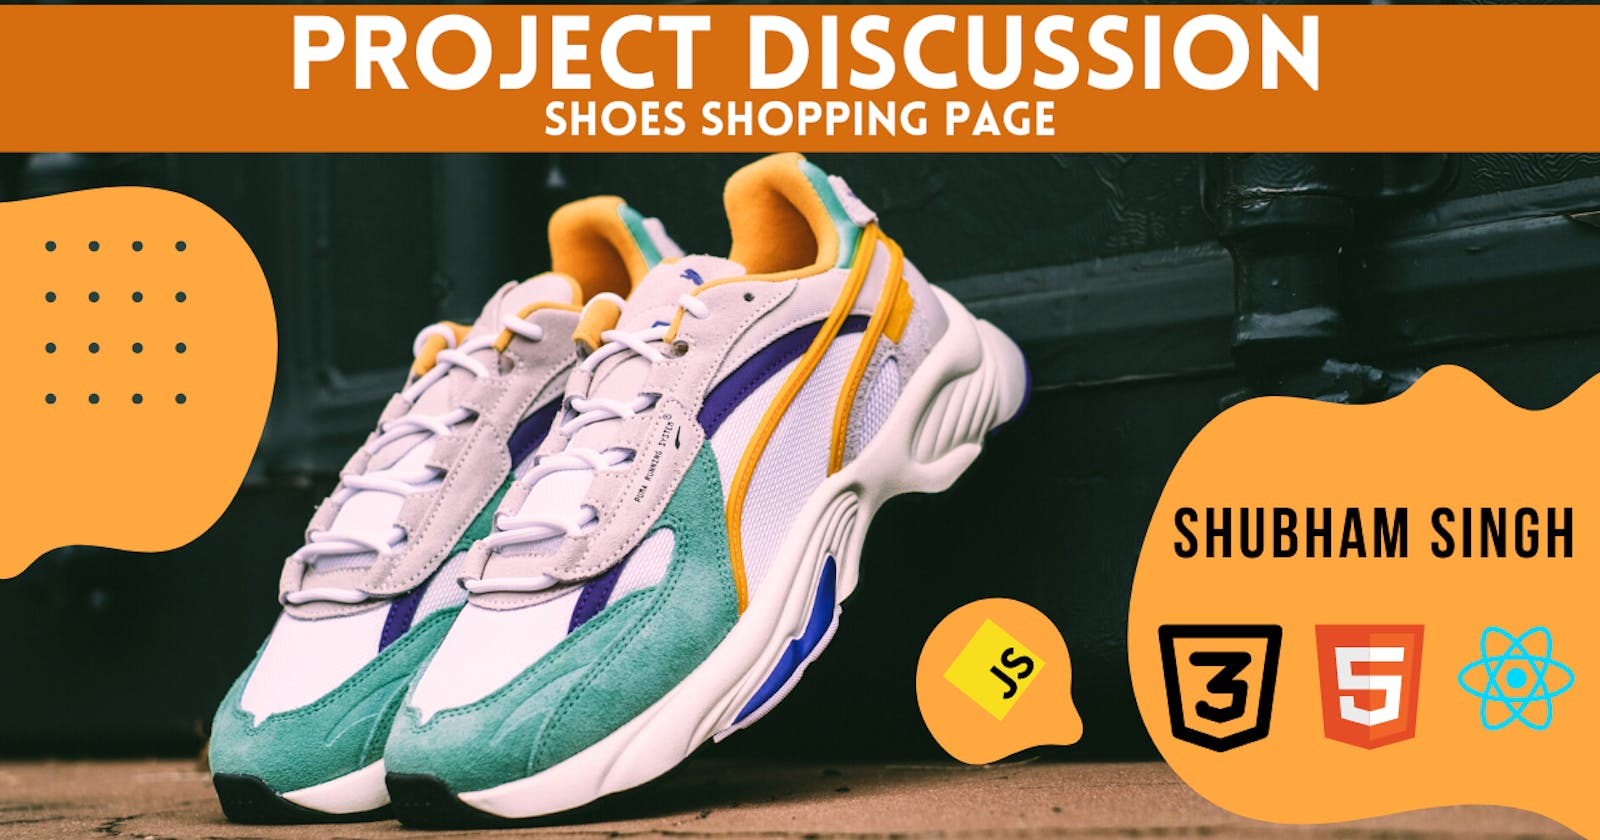 Project Discussion - Shoes Shopping Webpage